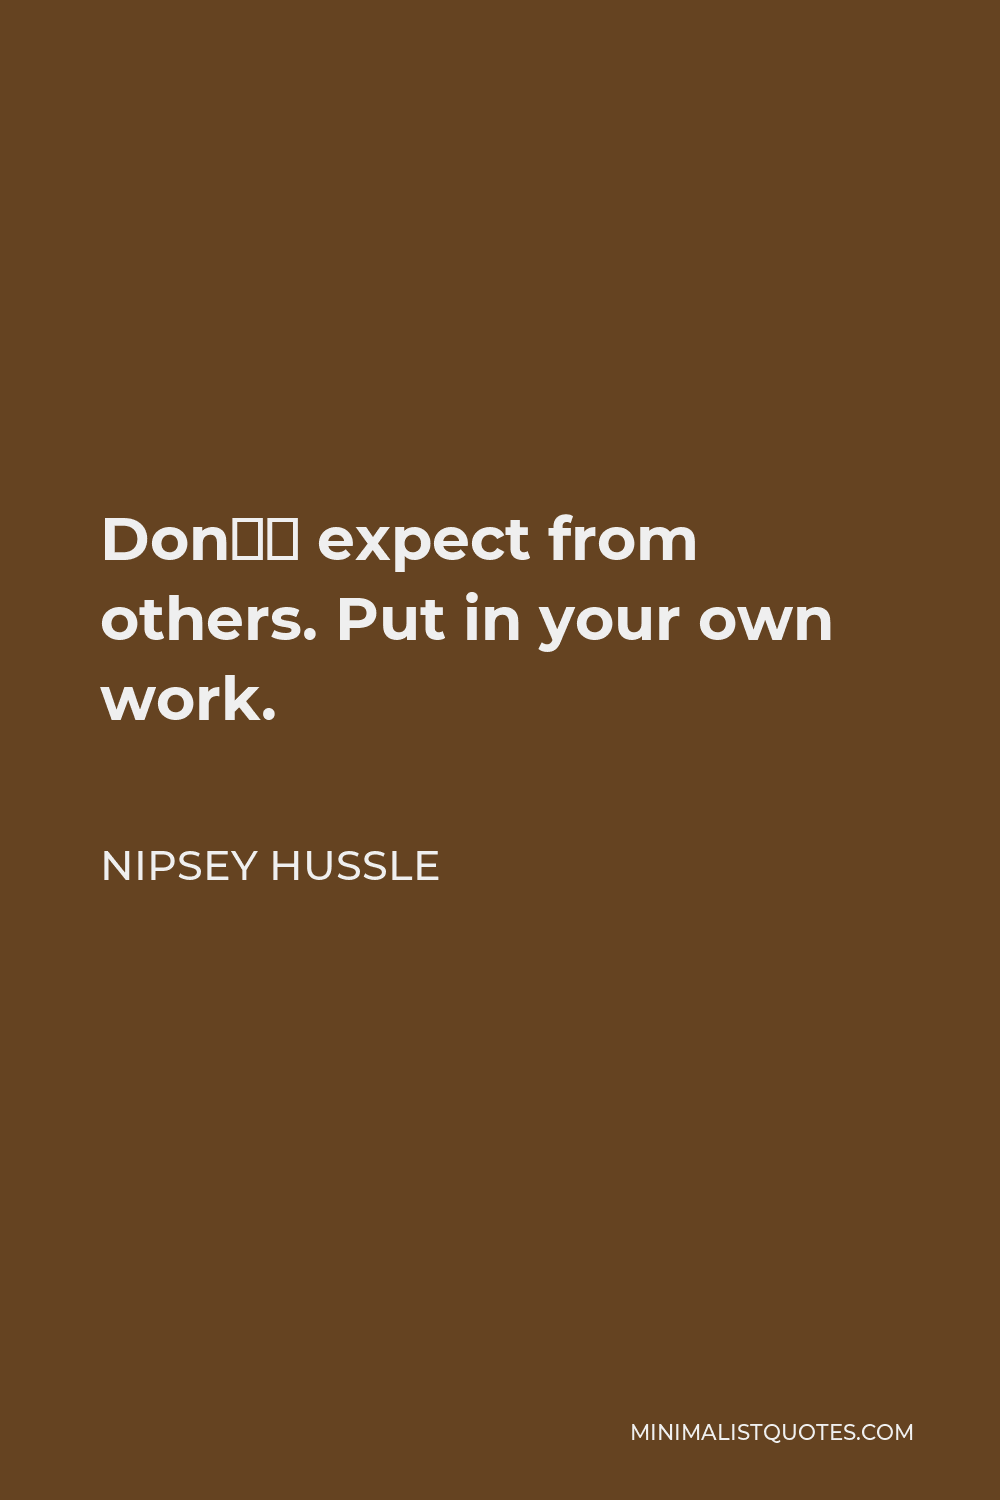 Nipsey Hussle Quote - Don’t expect from others. Put in your own work.